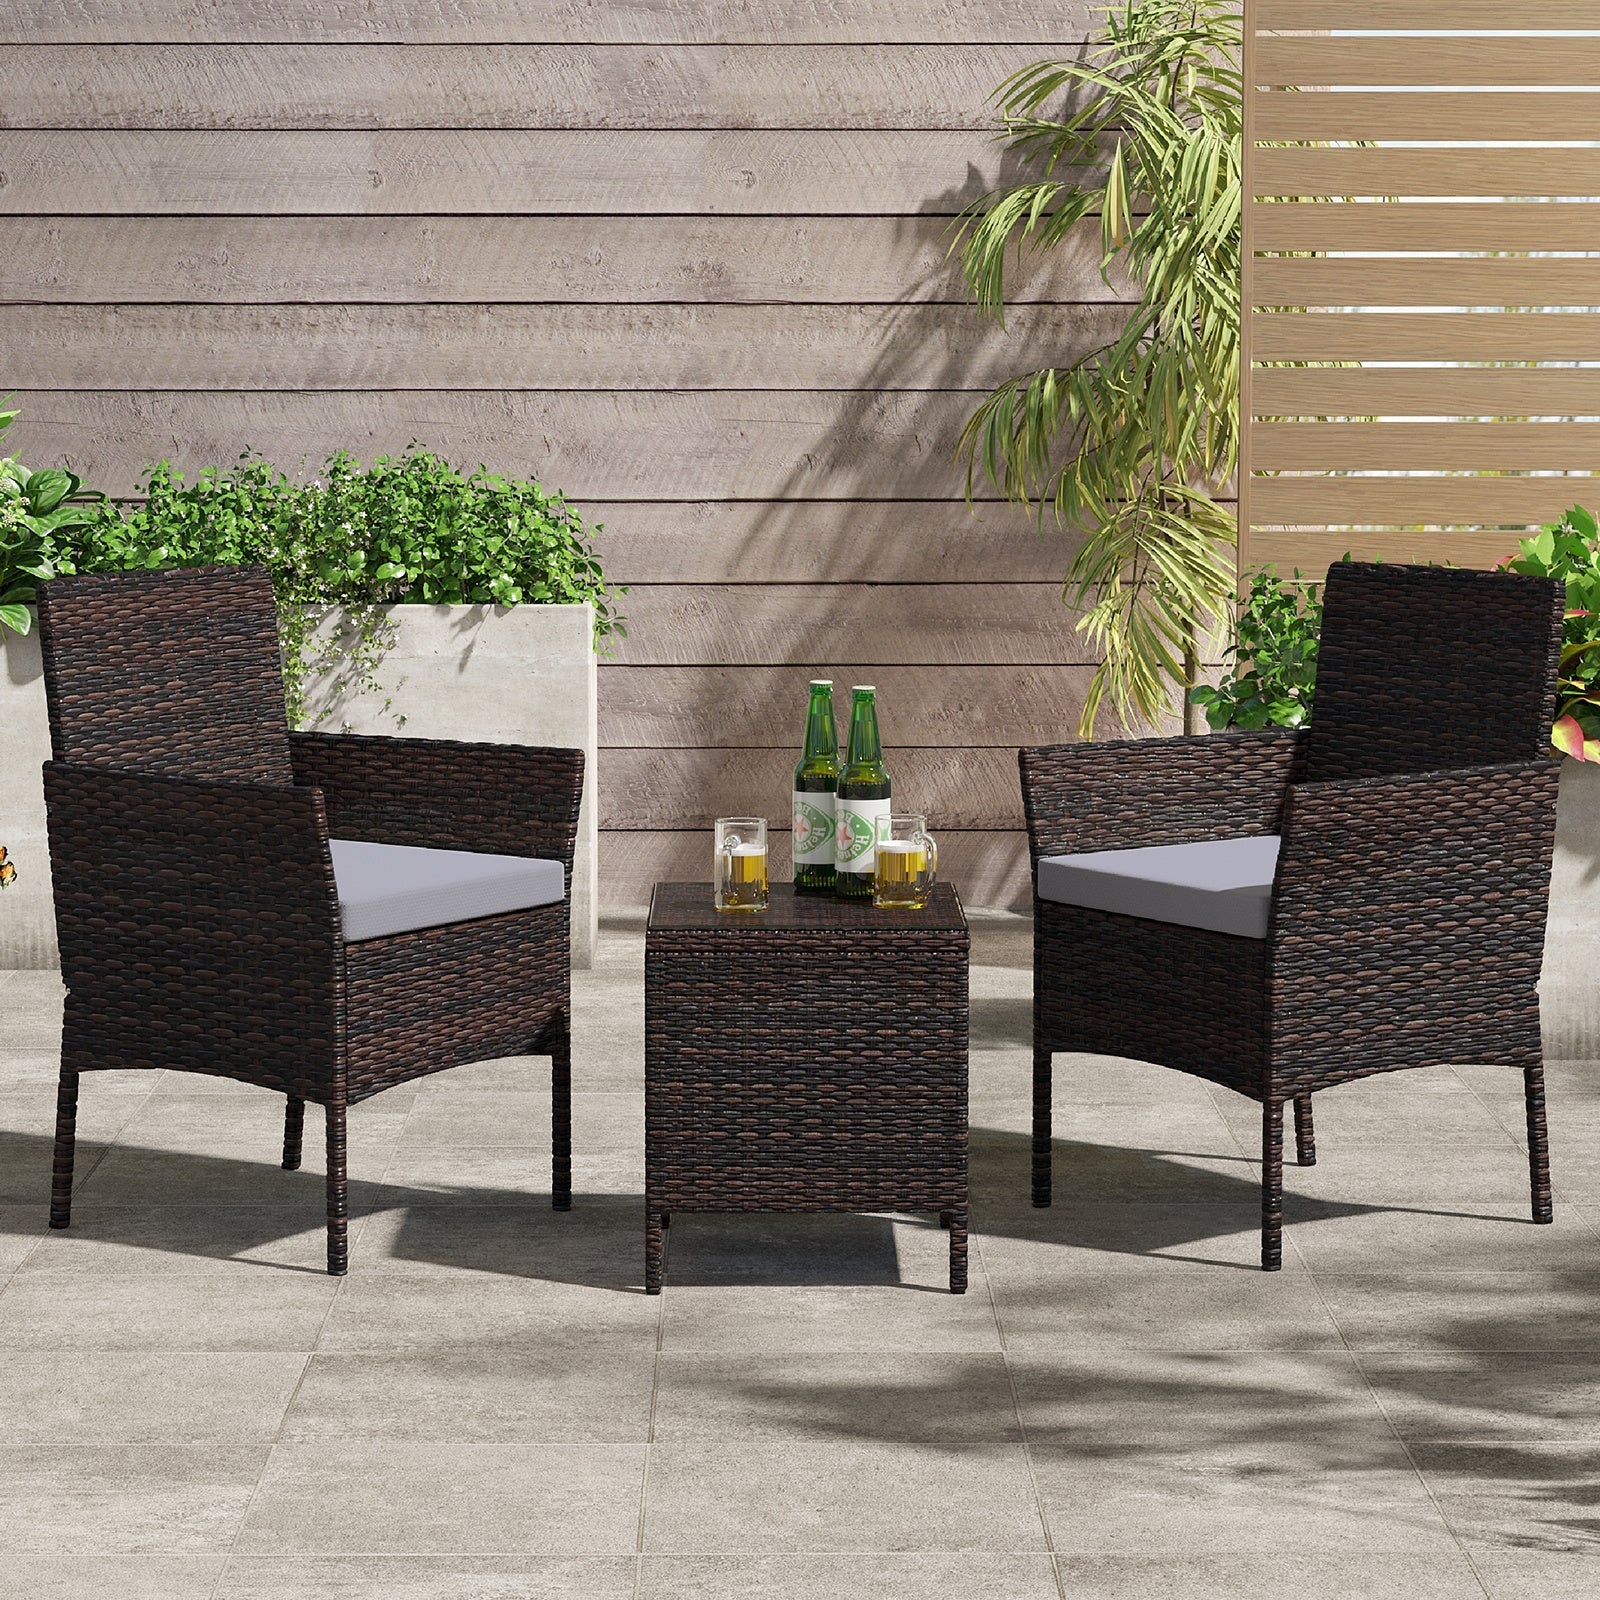 3 Pcs Outdoor Patio Rattan Furniture Set Modern Bistro Chairs and Side Table Set, PM1087